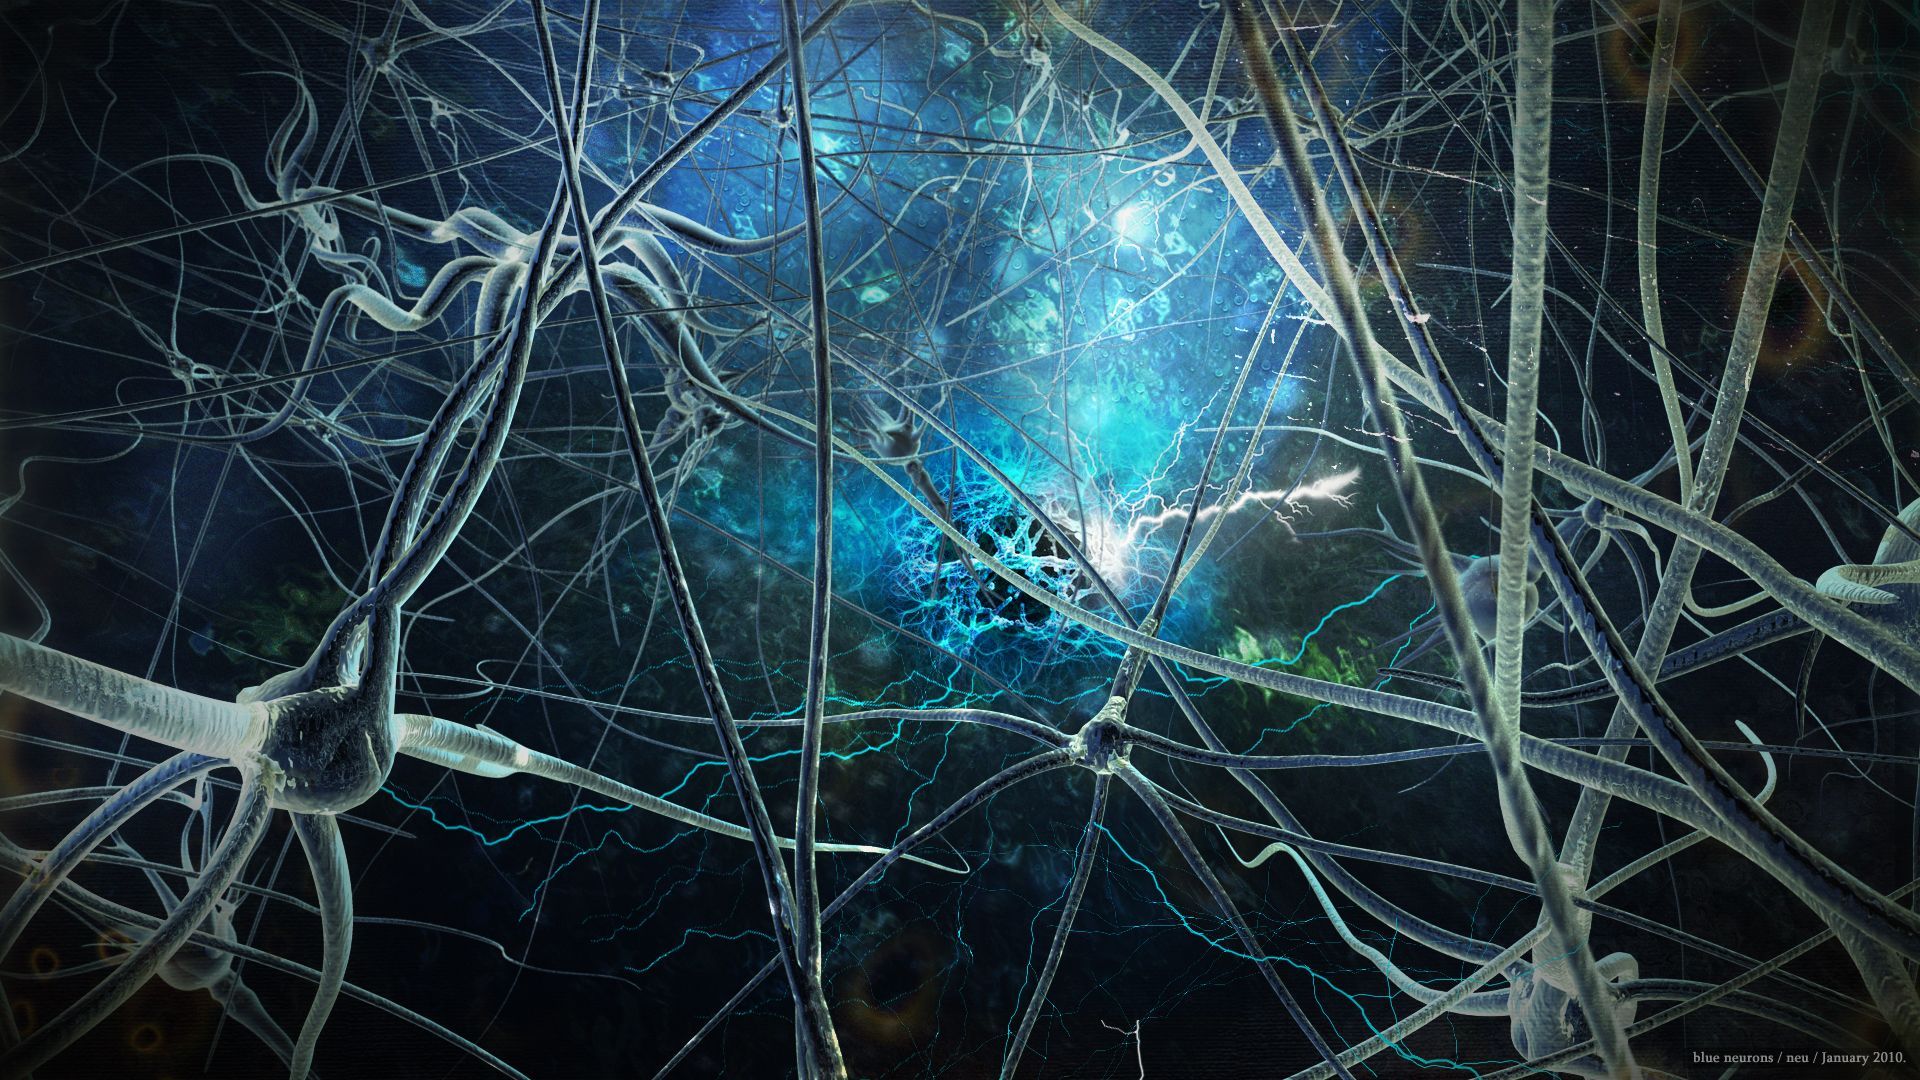 Abstract Neuron Wallpapers